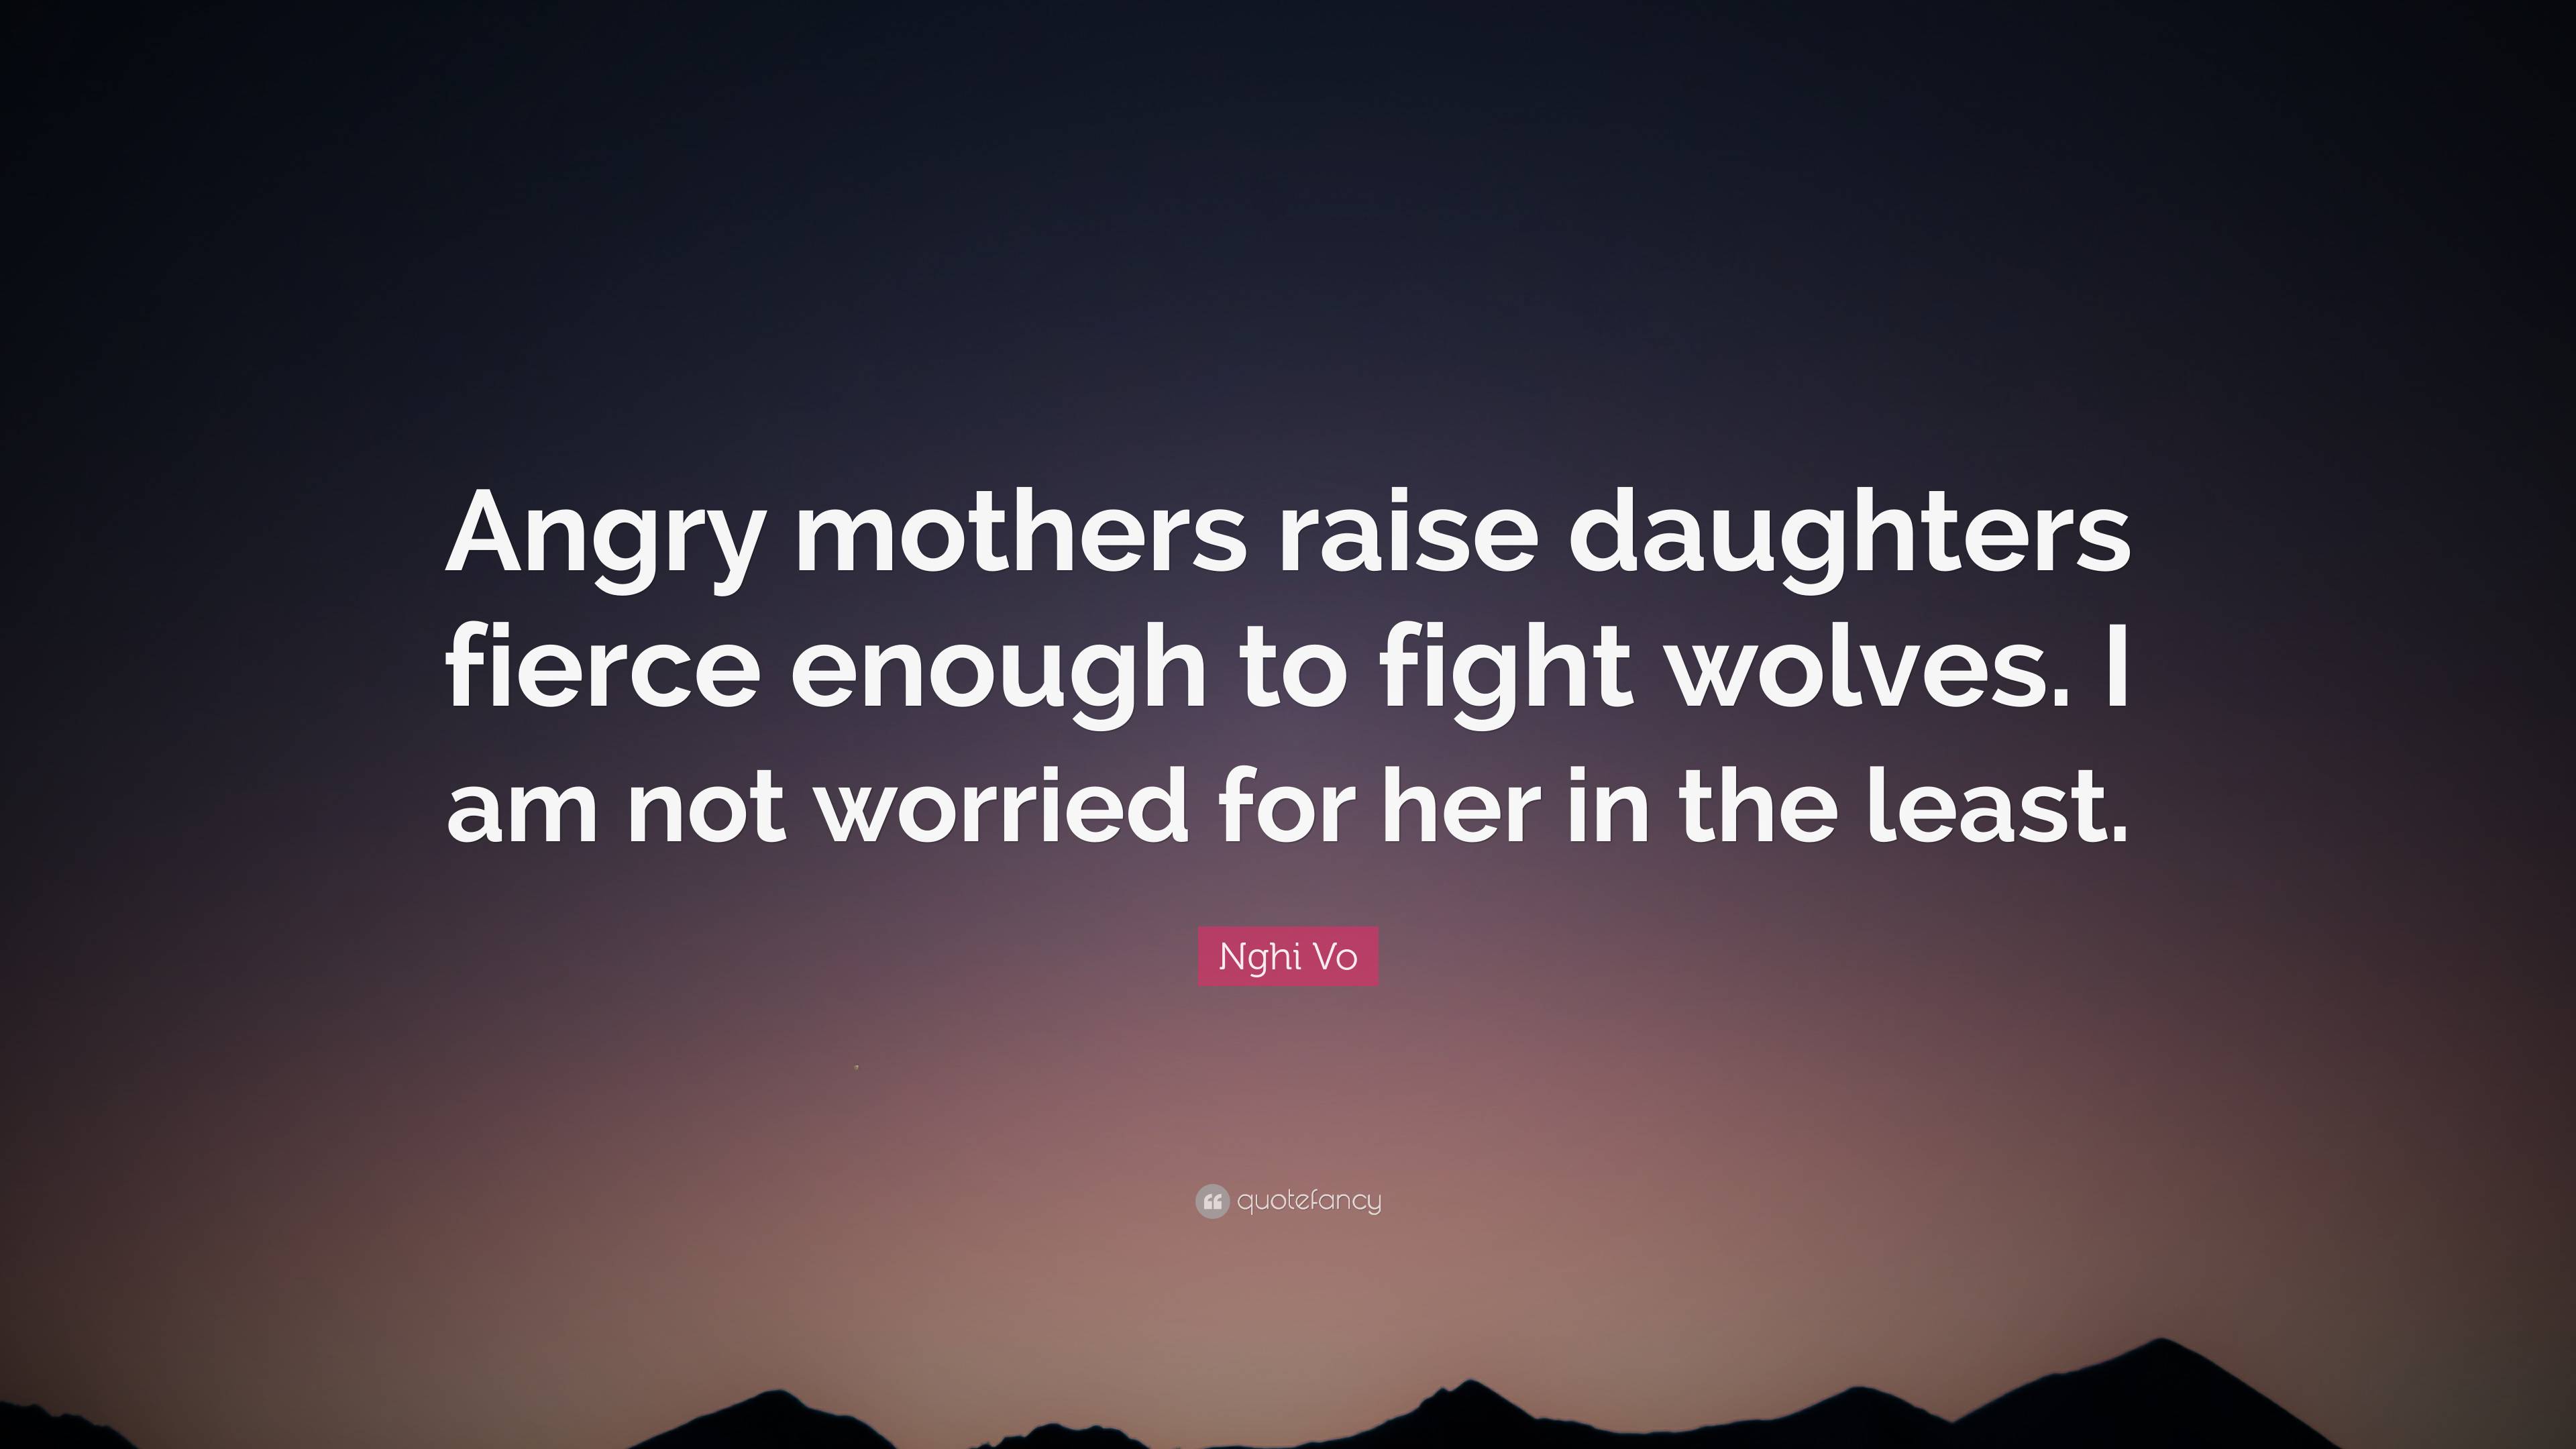 quotes about mothers and daughters fighting